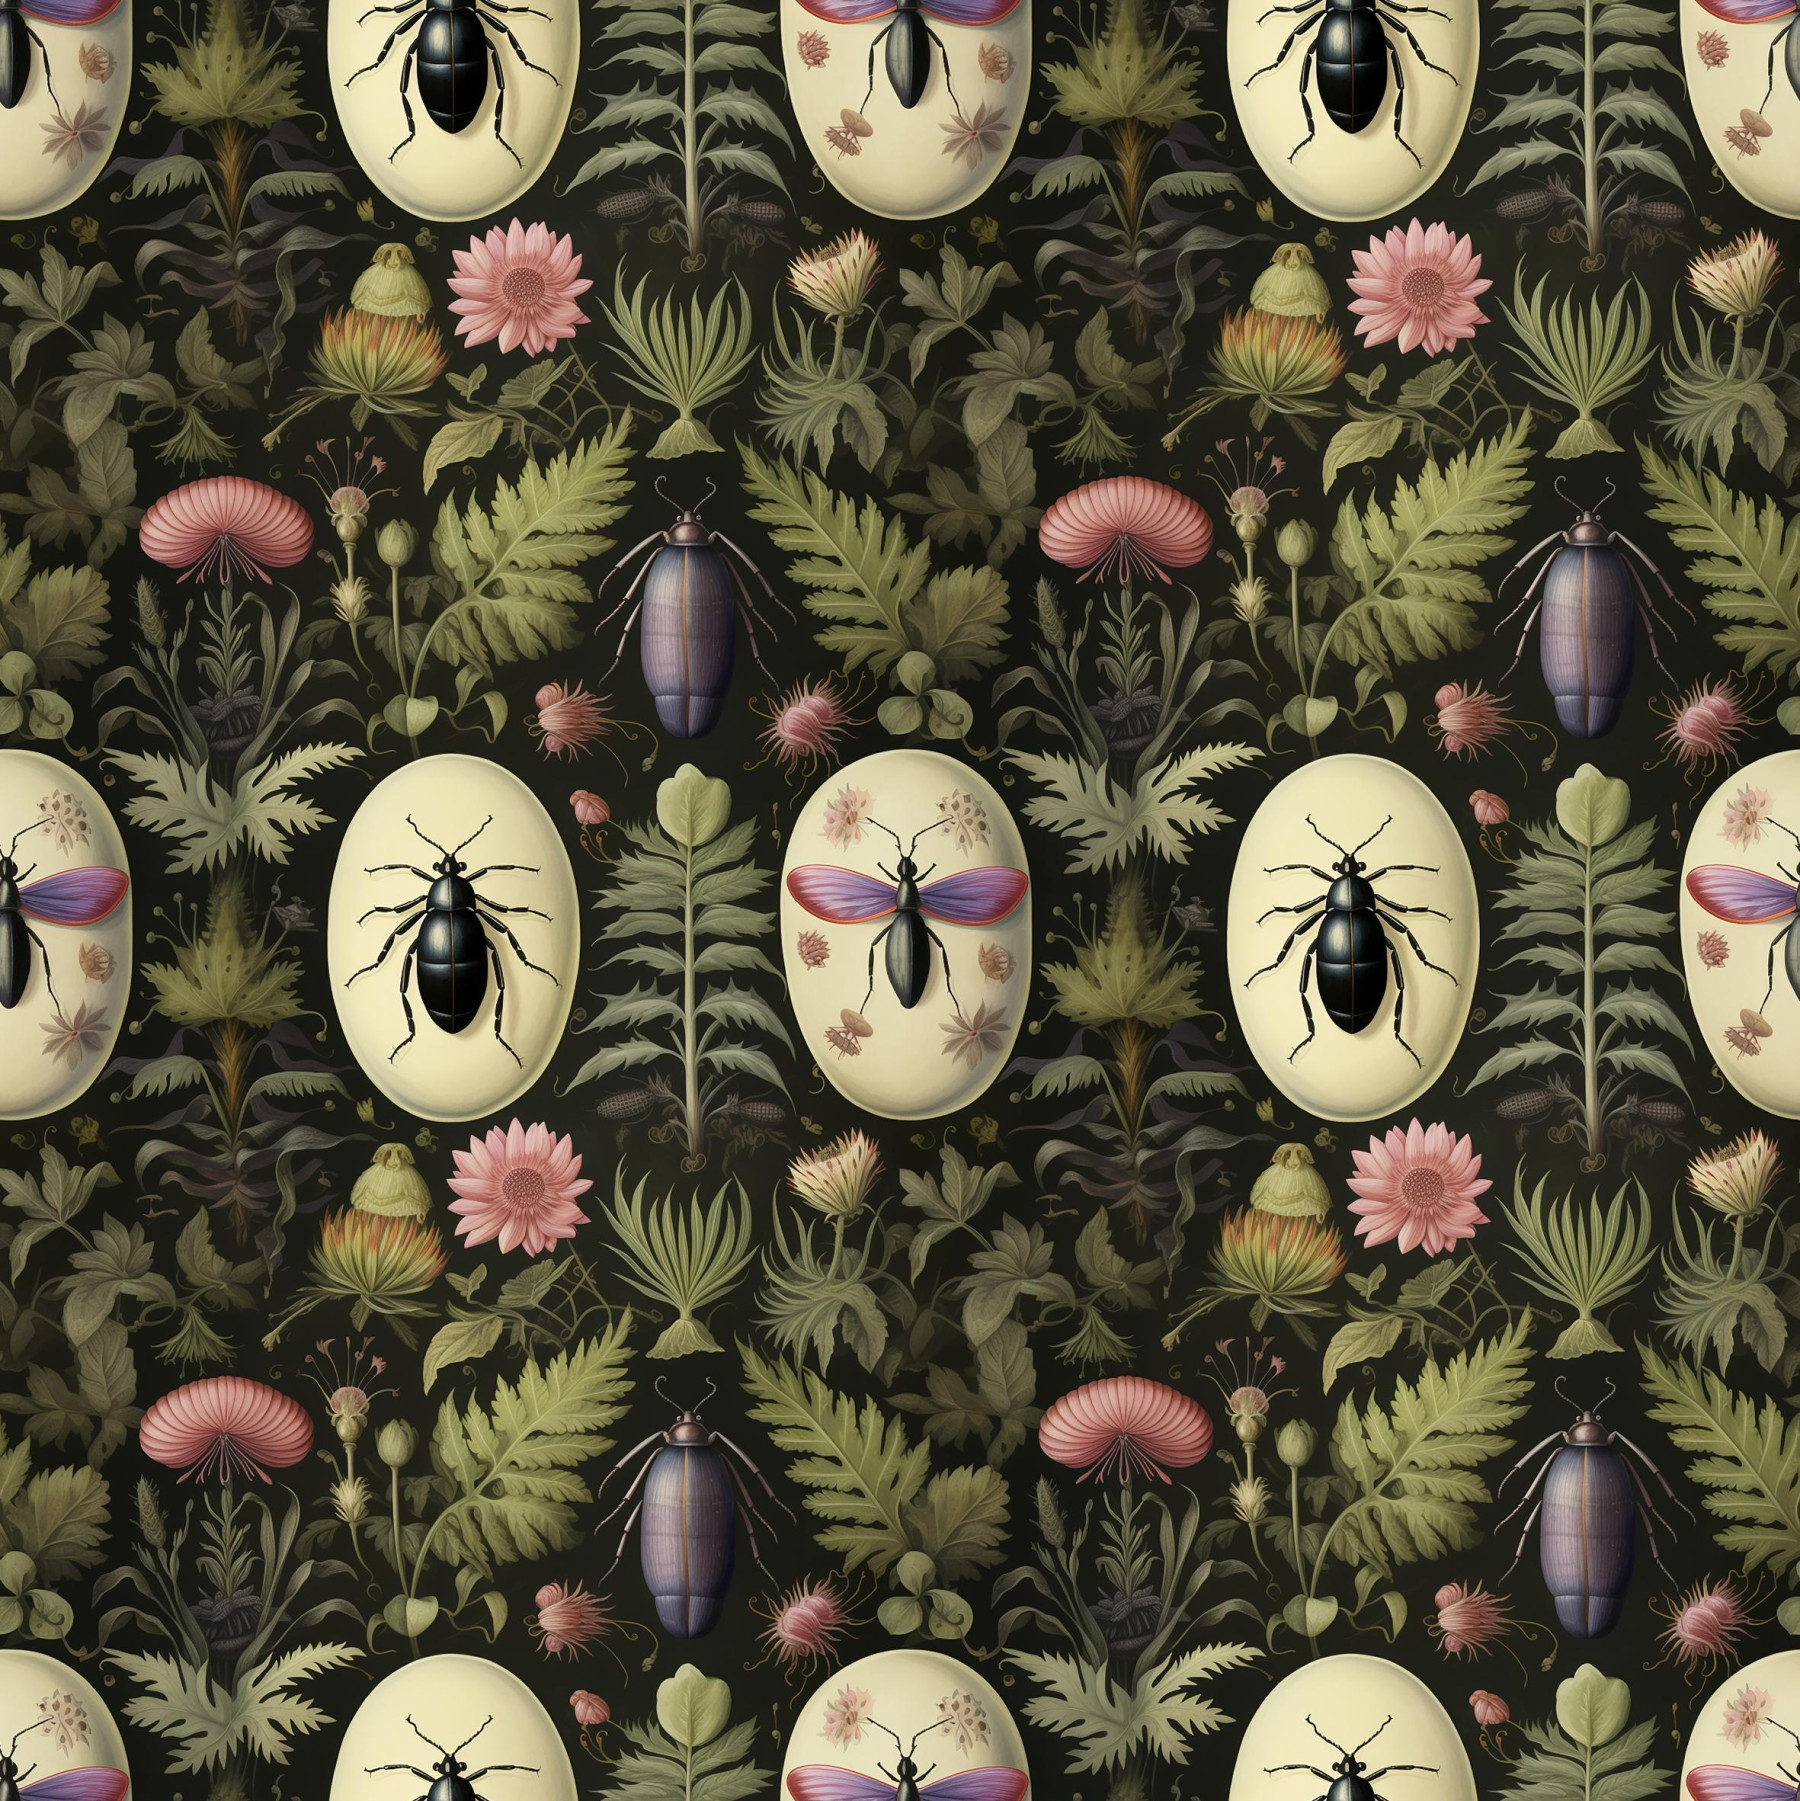 Botanical wz.5 - Woven Fabric for tablecloths